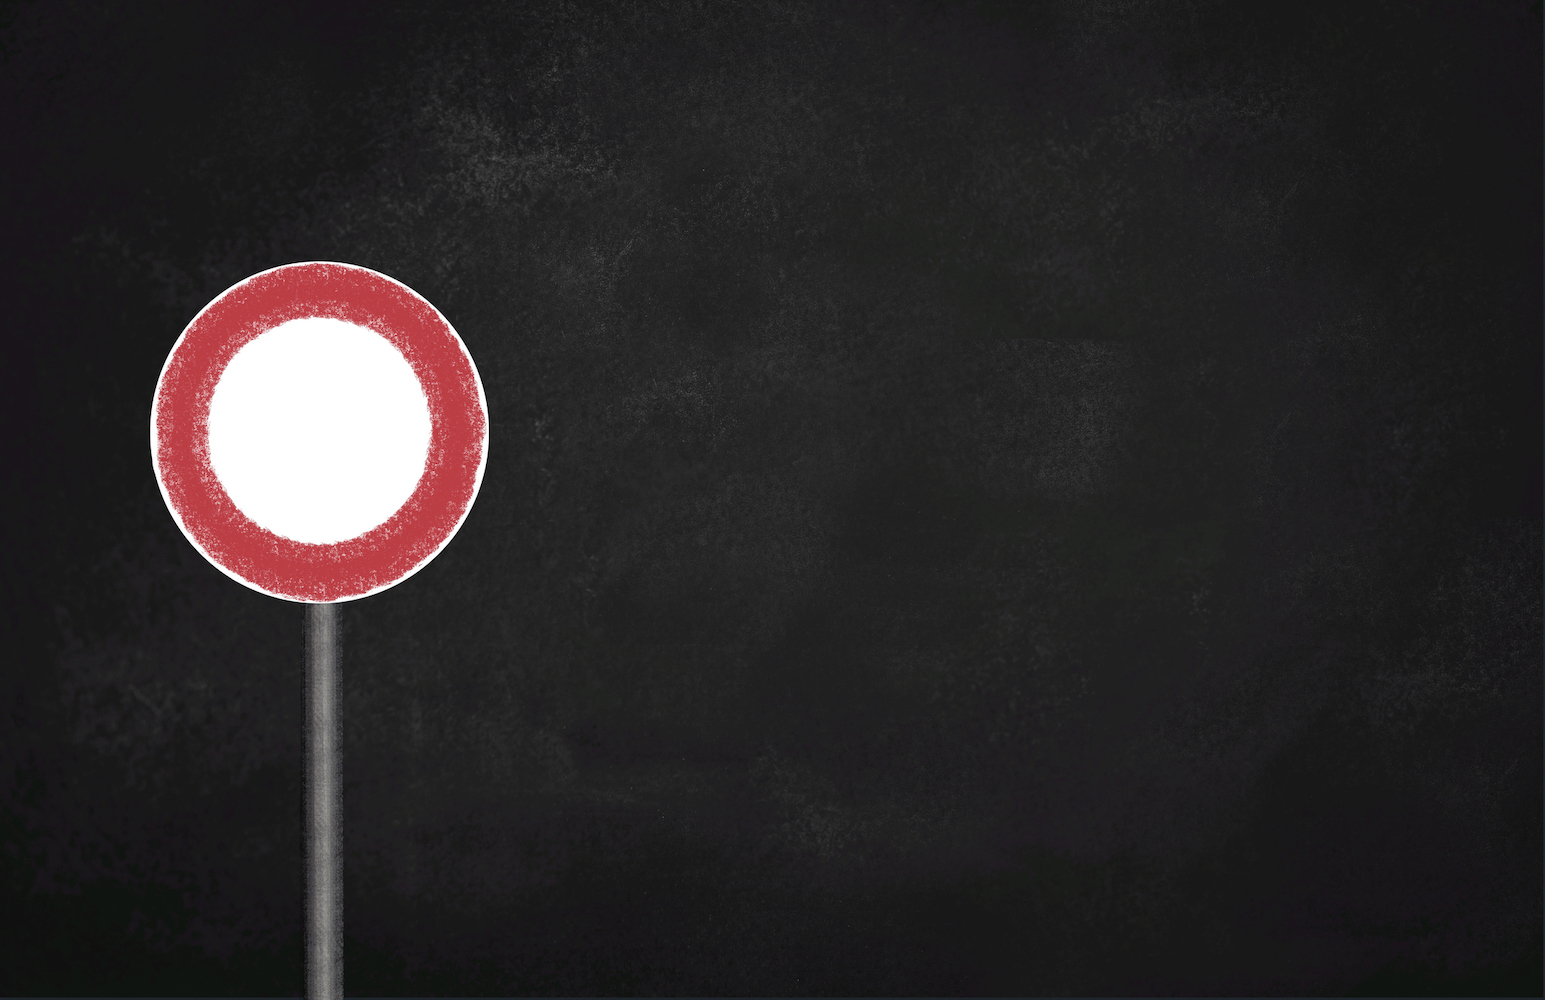 a circular traffic sign with a red circle on a white pole against a black background